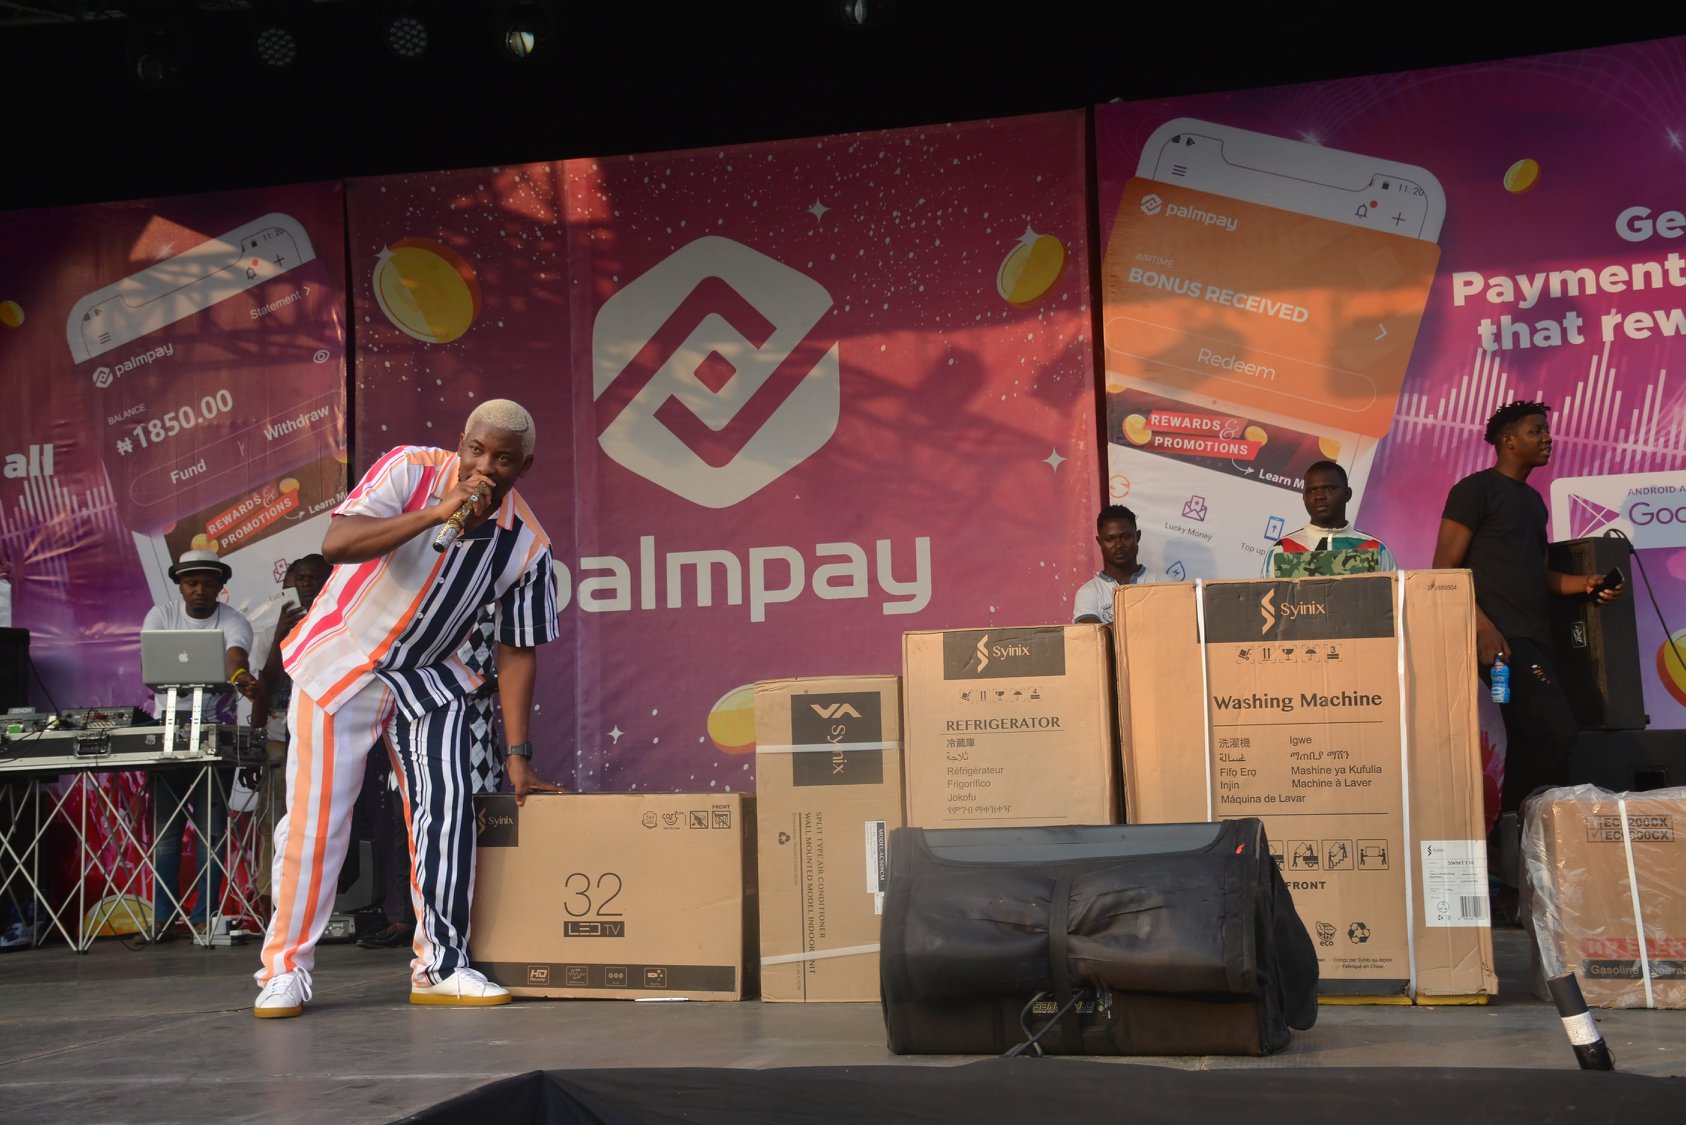 Chinese-owned PalmPay wants to grow aggressively in Nigeria in 2020